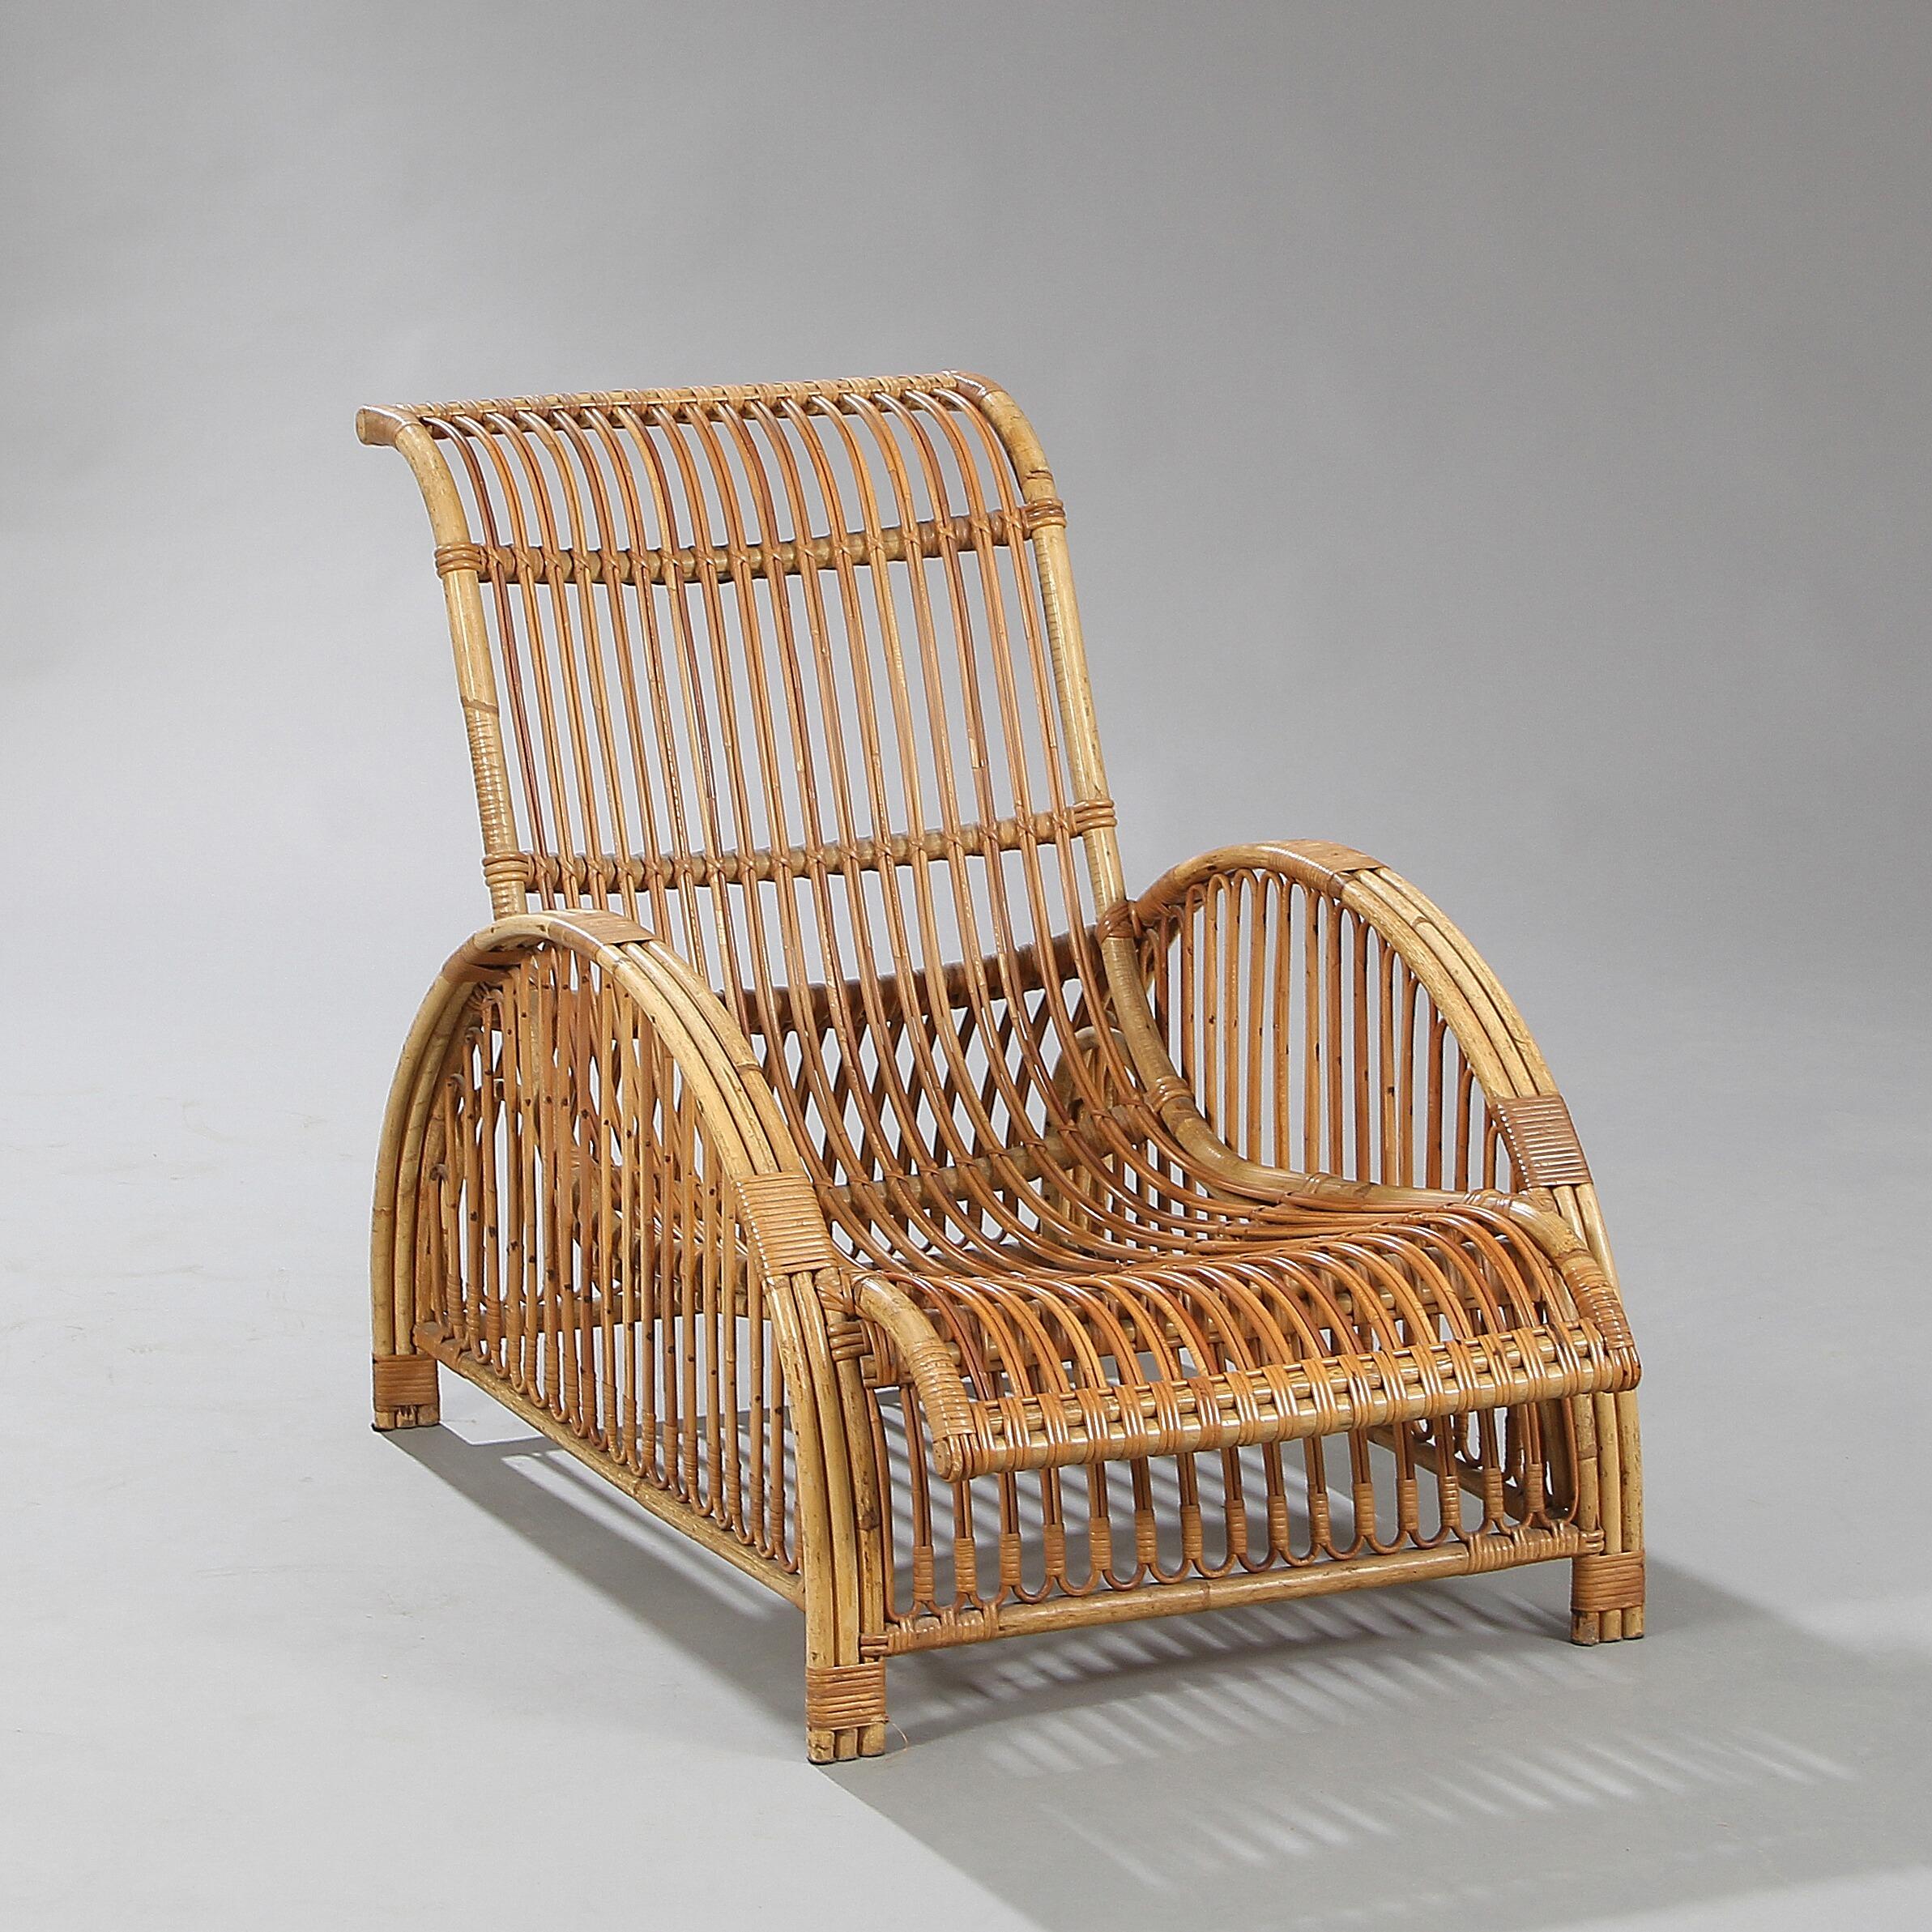 Arne Jacobsen “Paris Chair”, Easy Chair with Frame of Bamboo with Woven Cane im Zustand „Gut“ im Angebot in Vejle, DK